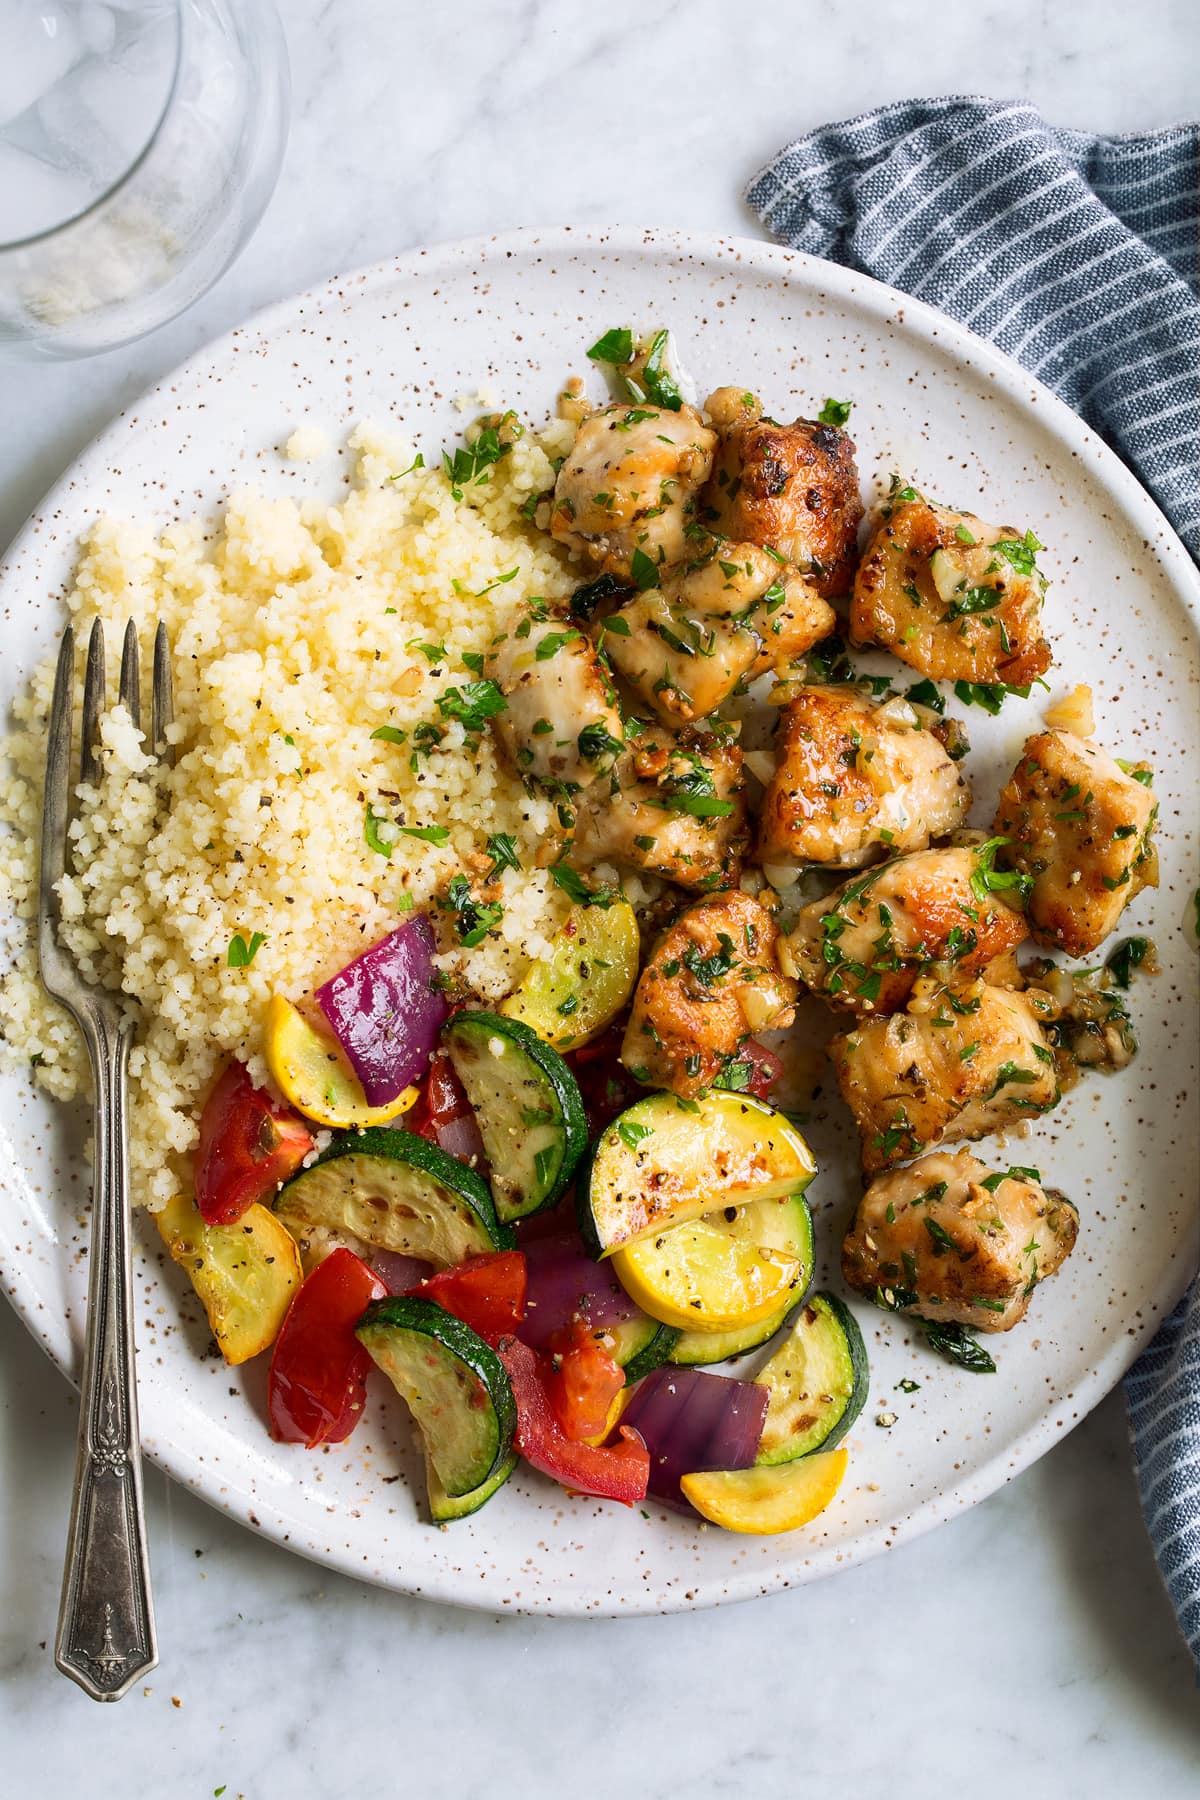 Garlic butter chicken bites on a plate with a side of couscous and fresh sauteed vegetables.